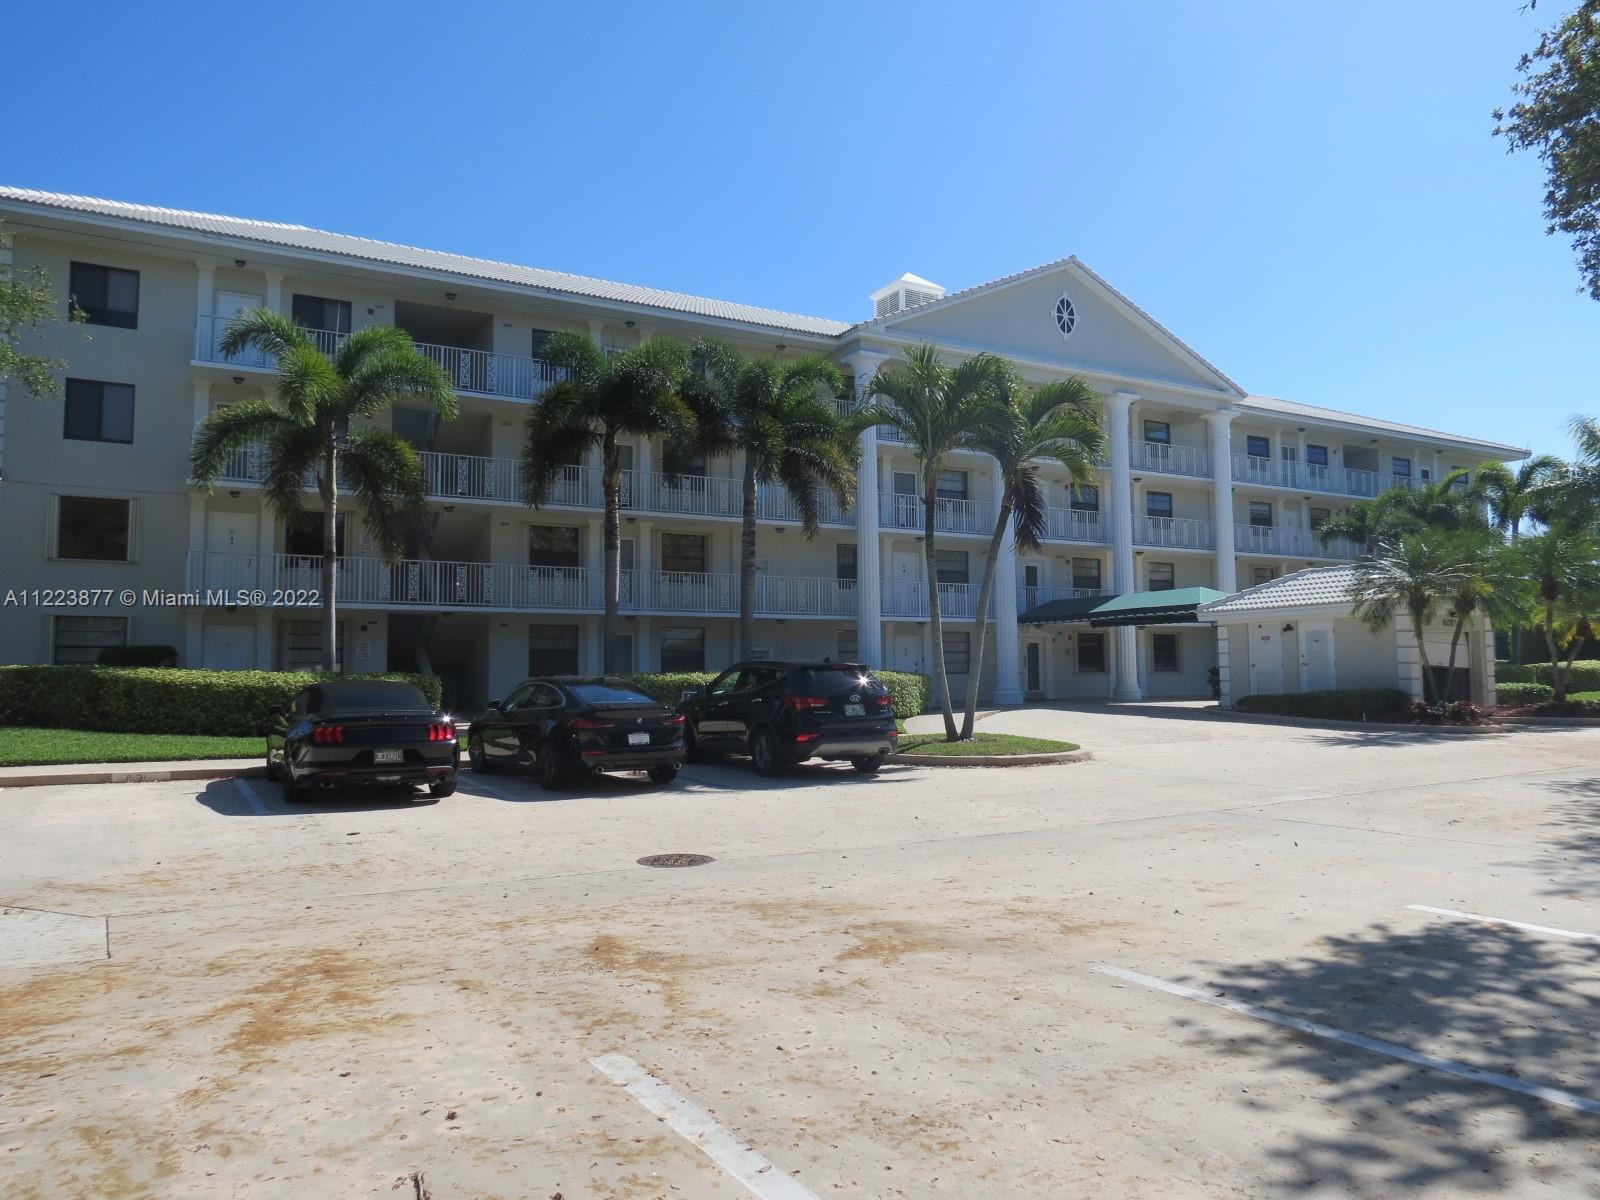 Welcome to Boca del Mar. This 2bed 2bath condo is very bright & spacious, located on the 3rd floor w